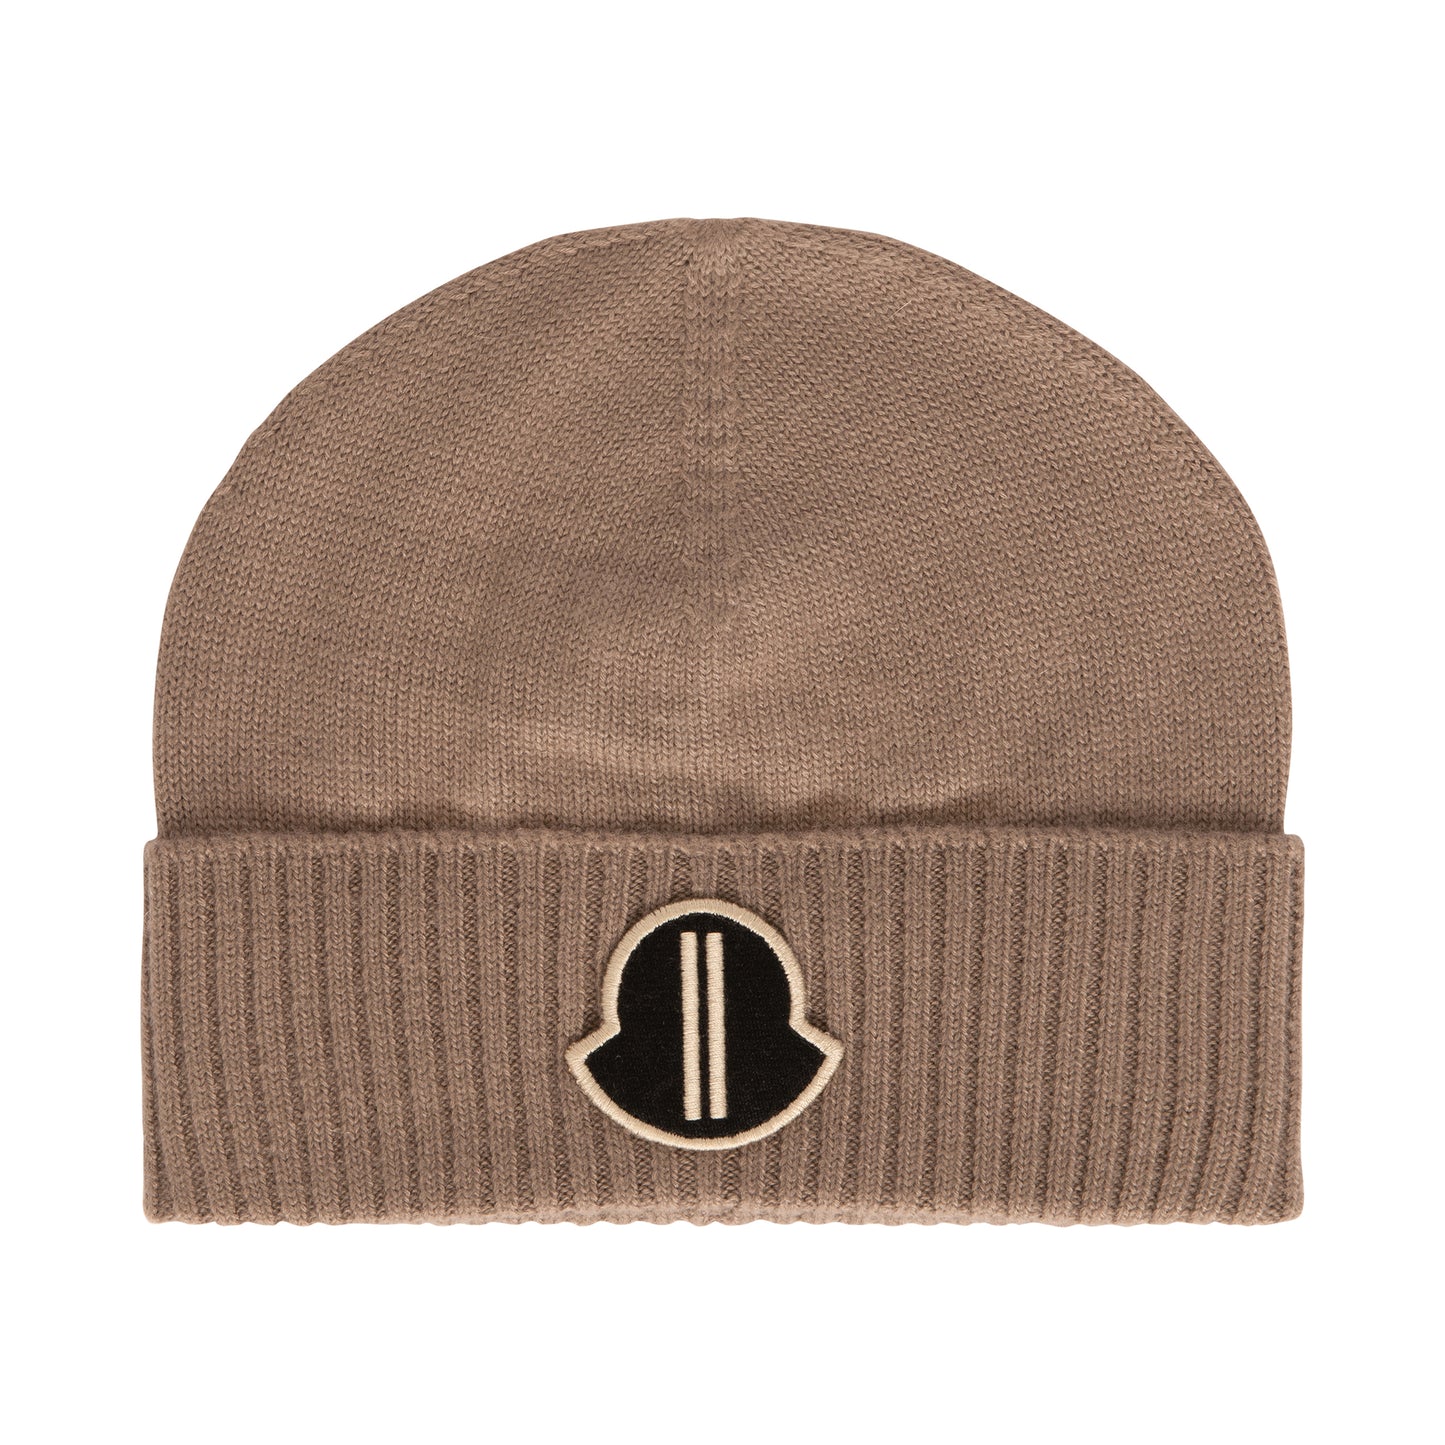 Rick Owens x Moncler Ribbed Beanie in Dust